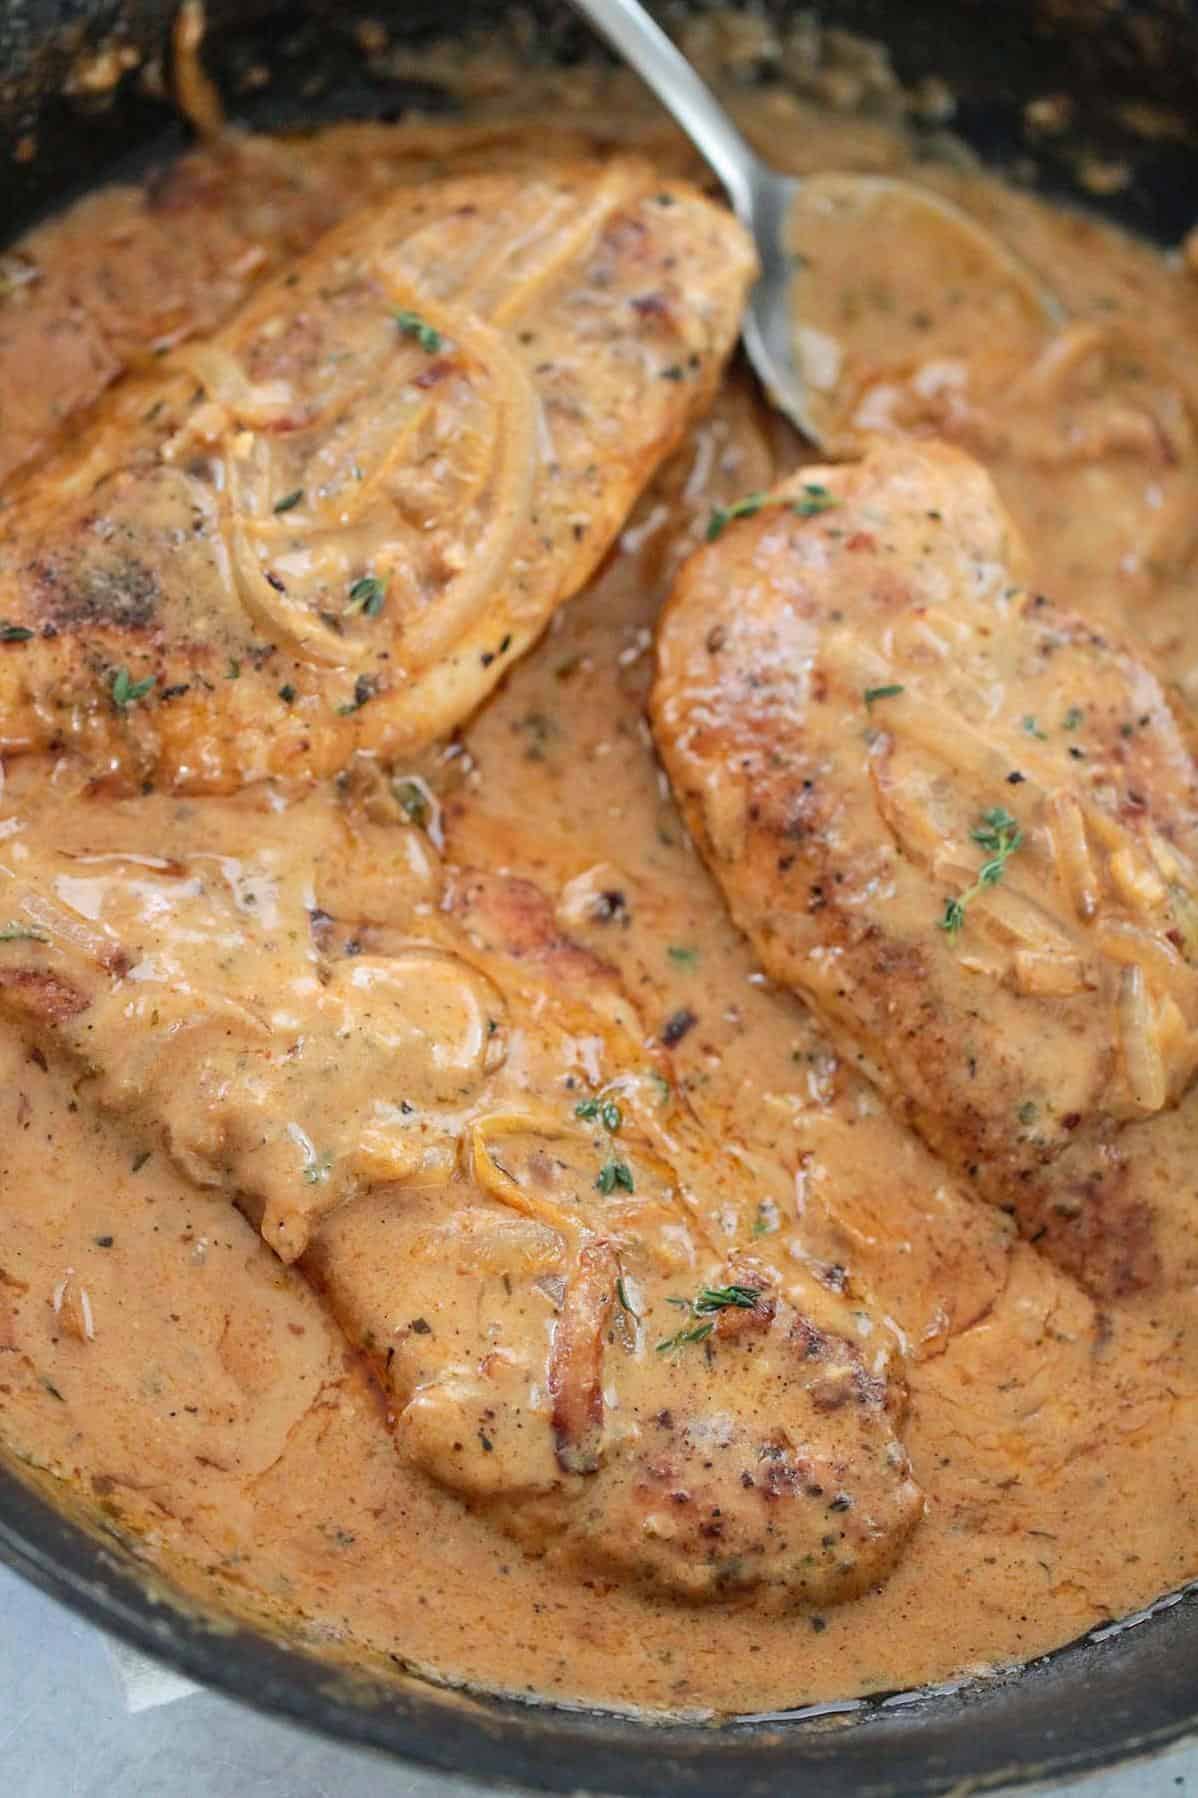  The juicy tenderness of this smothered chicken breast is simply irresistible!